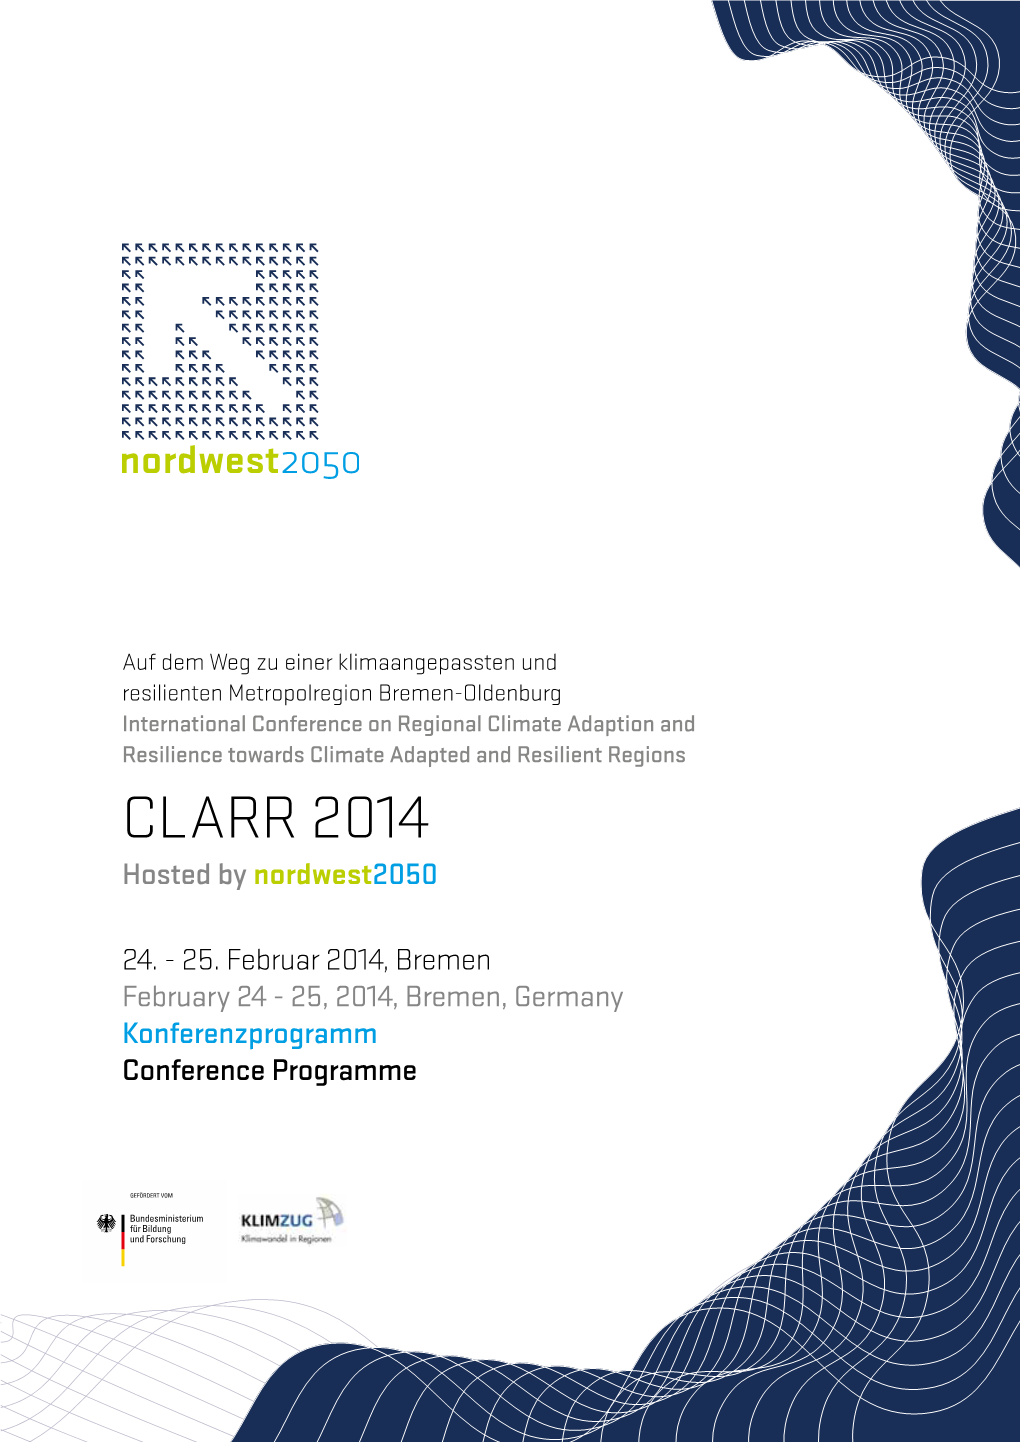 CLARR 2014 Hosted by Nordwest2050